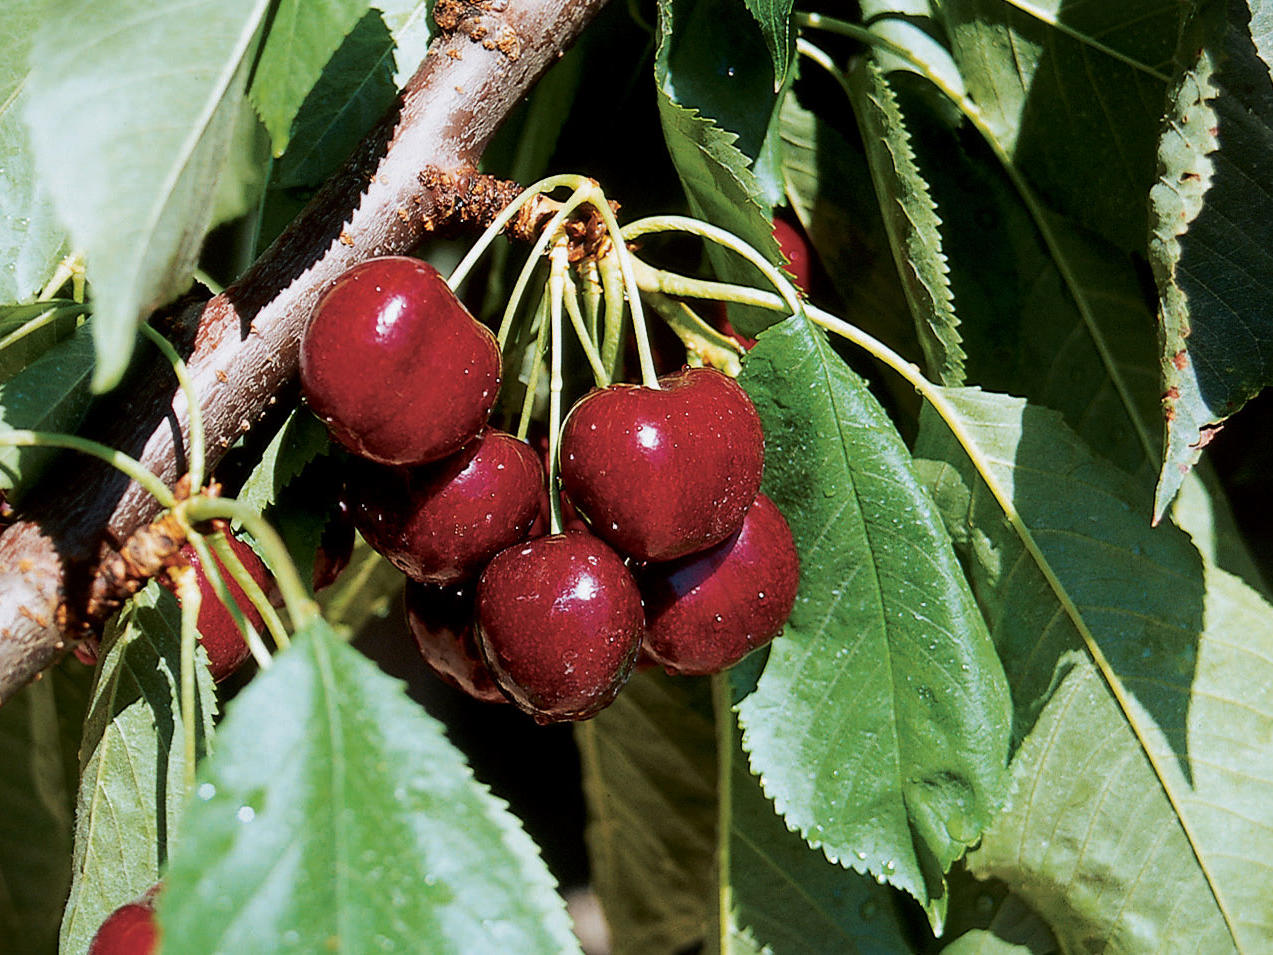 If You Like ‘Bing’, You’ll Love ‘Lapins’ Cherry